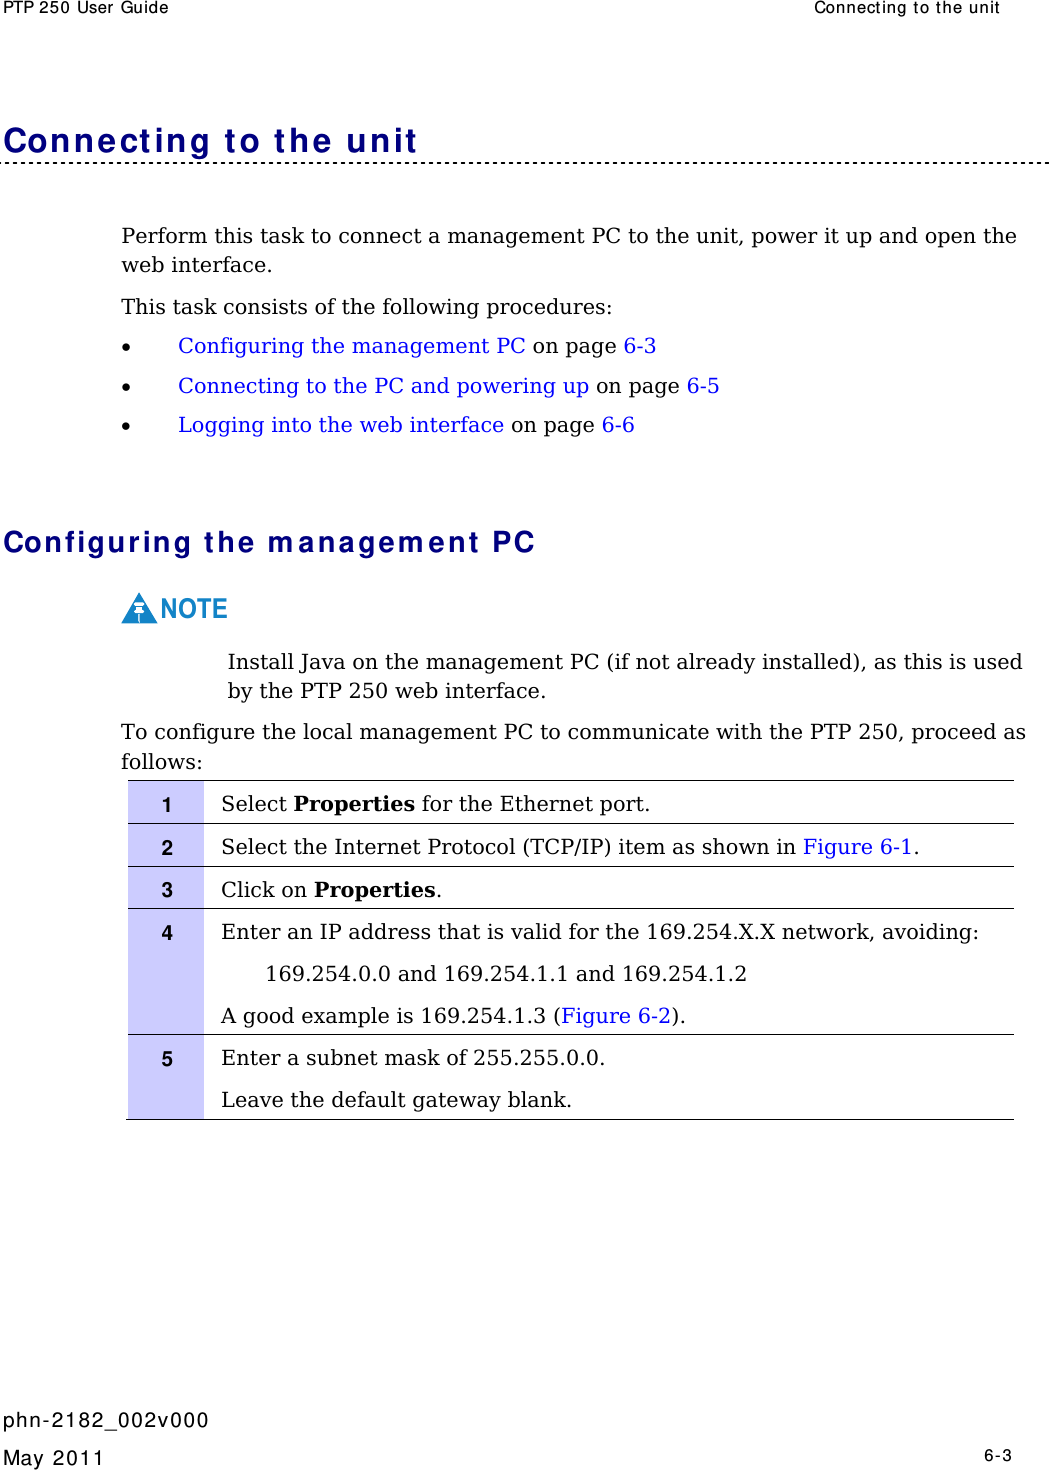 PTP 250 User Guide  Connect ing to t he unit   phn- 2182_002v000   May 2011   6-3  Conne ct ing t o the unit  Perform this task to connect a management PC to the unit, power it up and open the web interface. This task consists of the following procedures: • Configuring the management PC on page 6-3 • Connecting to the PC and powering up on page 6-5 • Logging into the web interface on page 6-6  Configur ing t he m anagem e nt  PC NOTE  Install Java on the management PC (if not already installed), as this is used by the PTP 250 web interface. To configure the local management PC to communicate with the PTP 250, proceed as follows: 1   Select Properties for the Ethernet port. 2   Select the Internet Protocol (TCP/IP) item as shown in Figure 6-1. 3   Click on Properties. 4   Enter an IP address that is valid for the 169.254.X.X network, avoiding: 169.254.0.0 and 169.254.1.1 and 169.254.1.2 A good example is 169.254.1.3 (Figure 6-2). 5   Enter a subnet mask of 255.255.0.0. Leave the default gateway blank.   